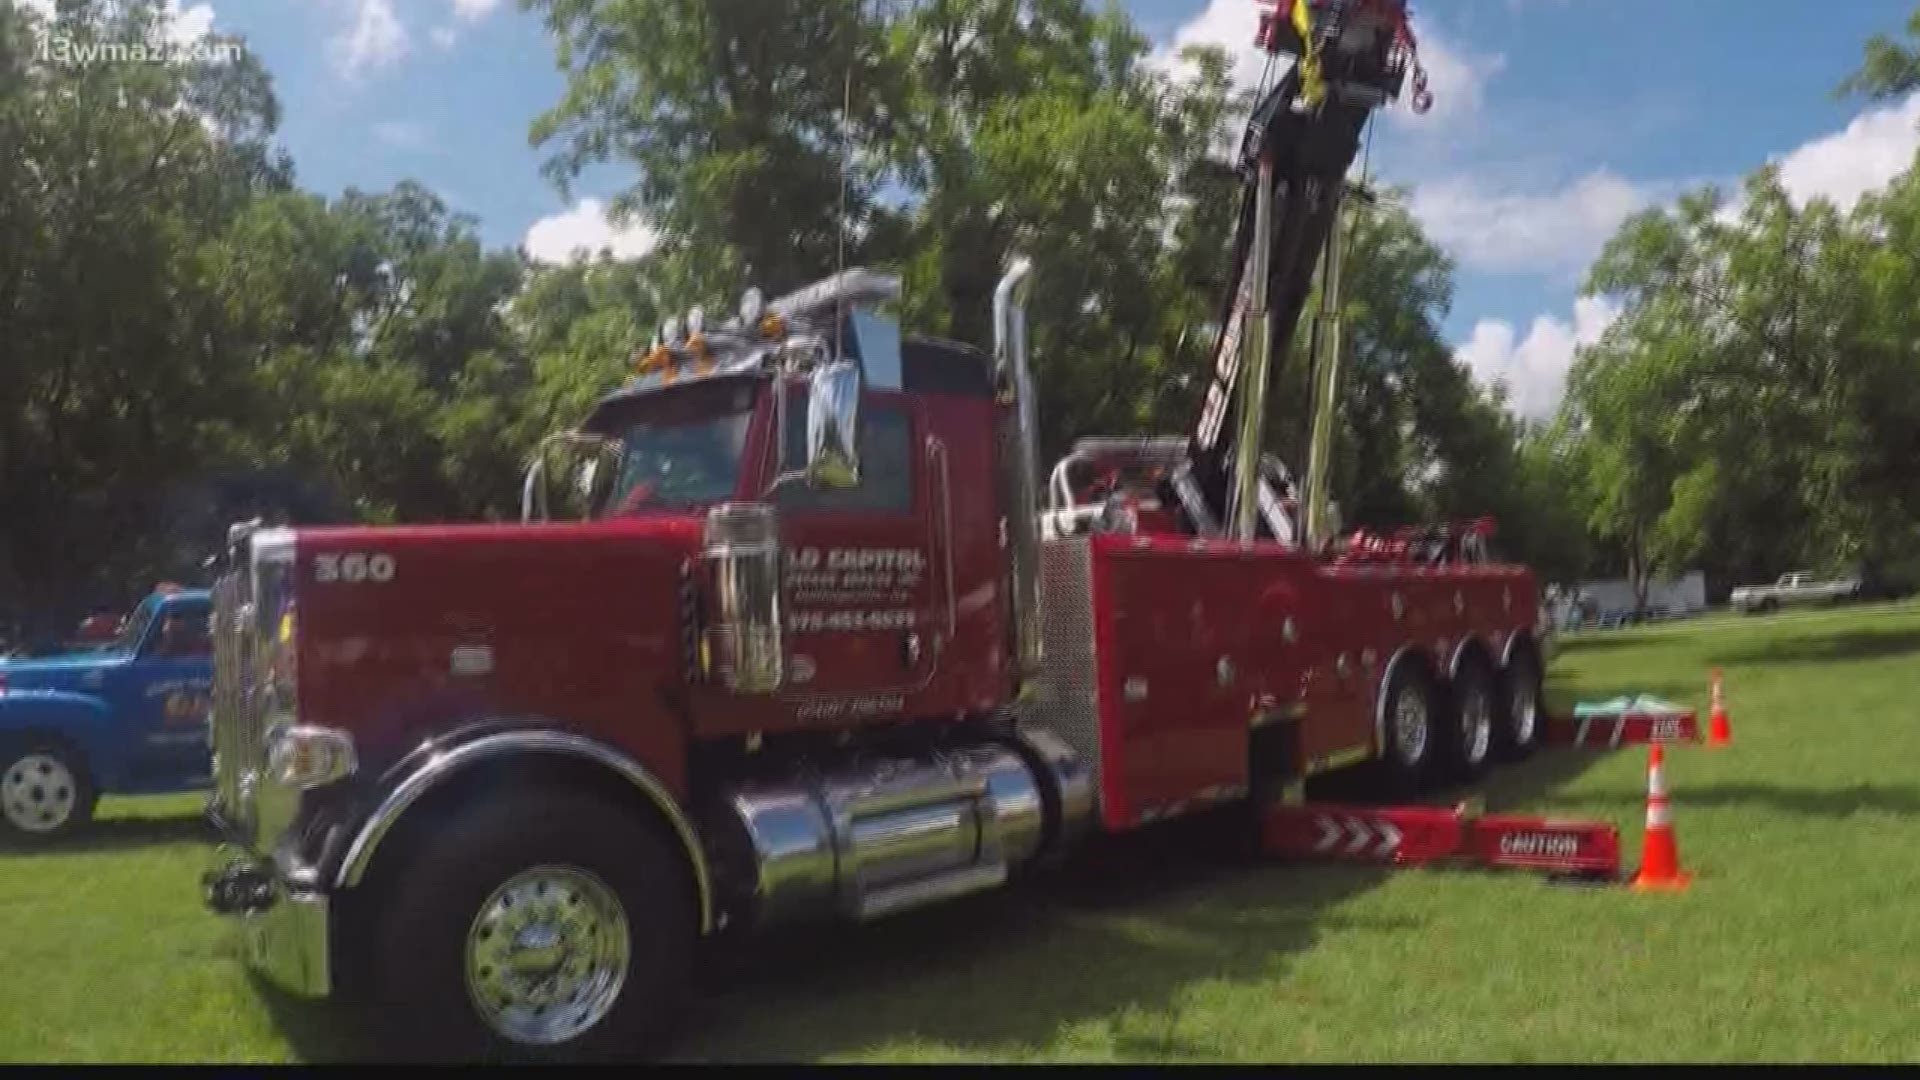 Tow truck fundraiser starts its engines